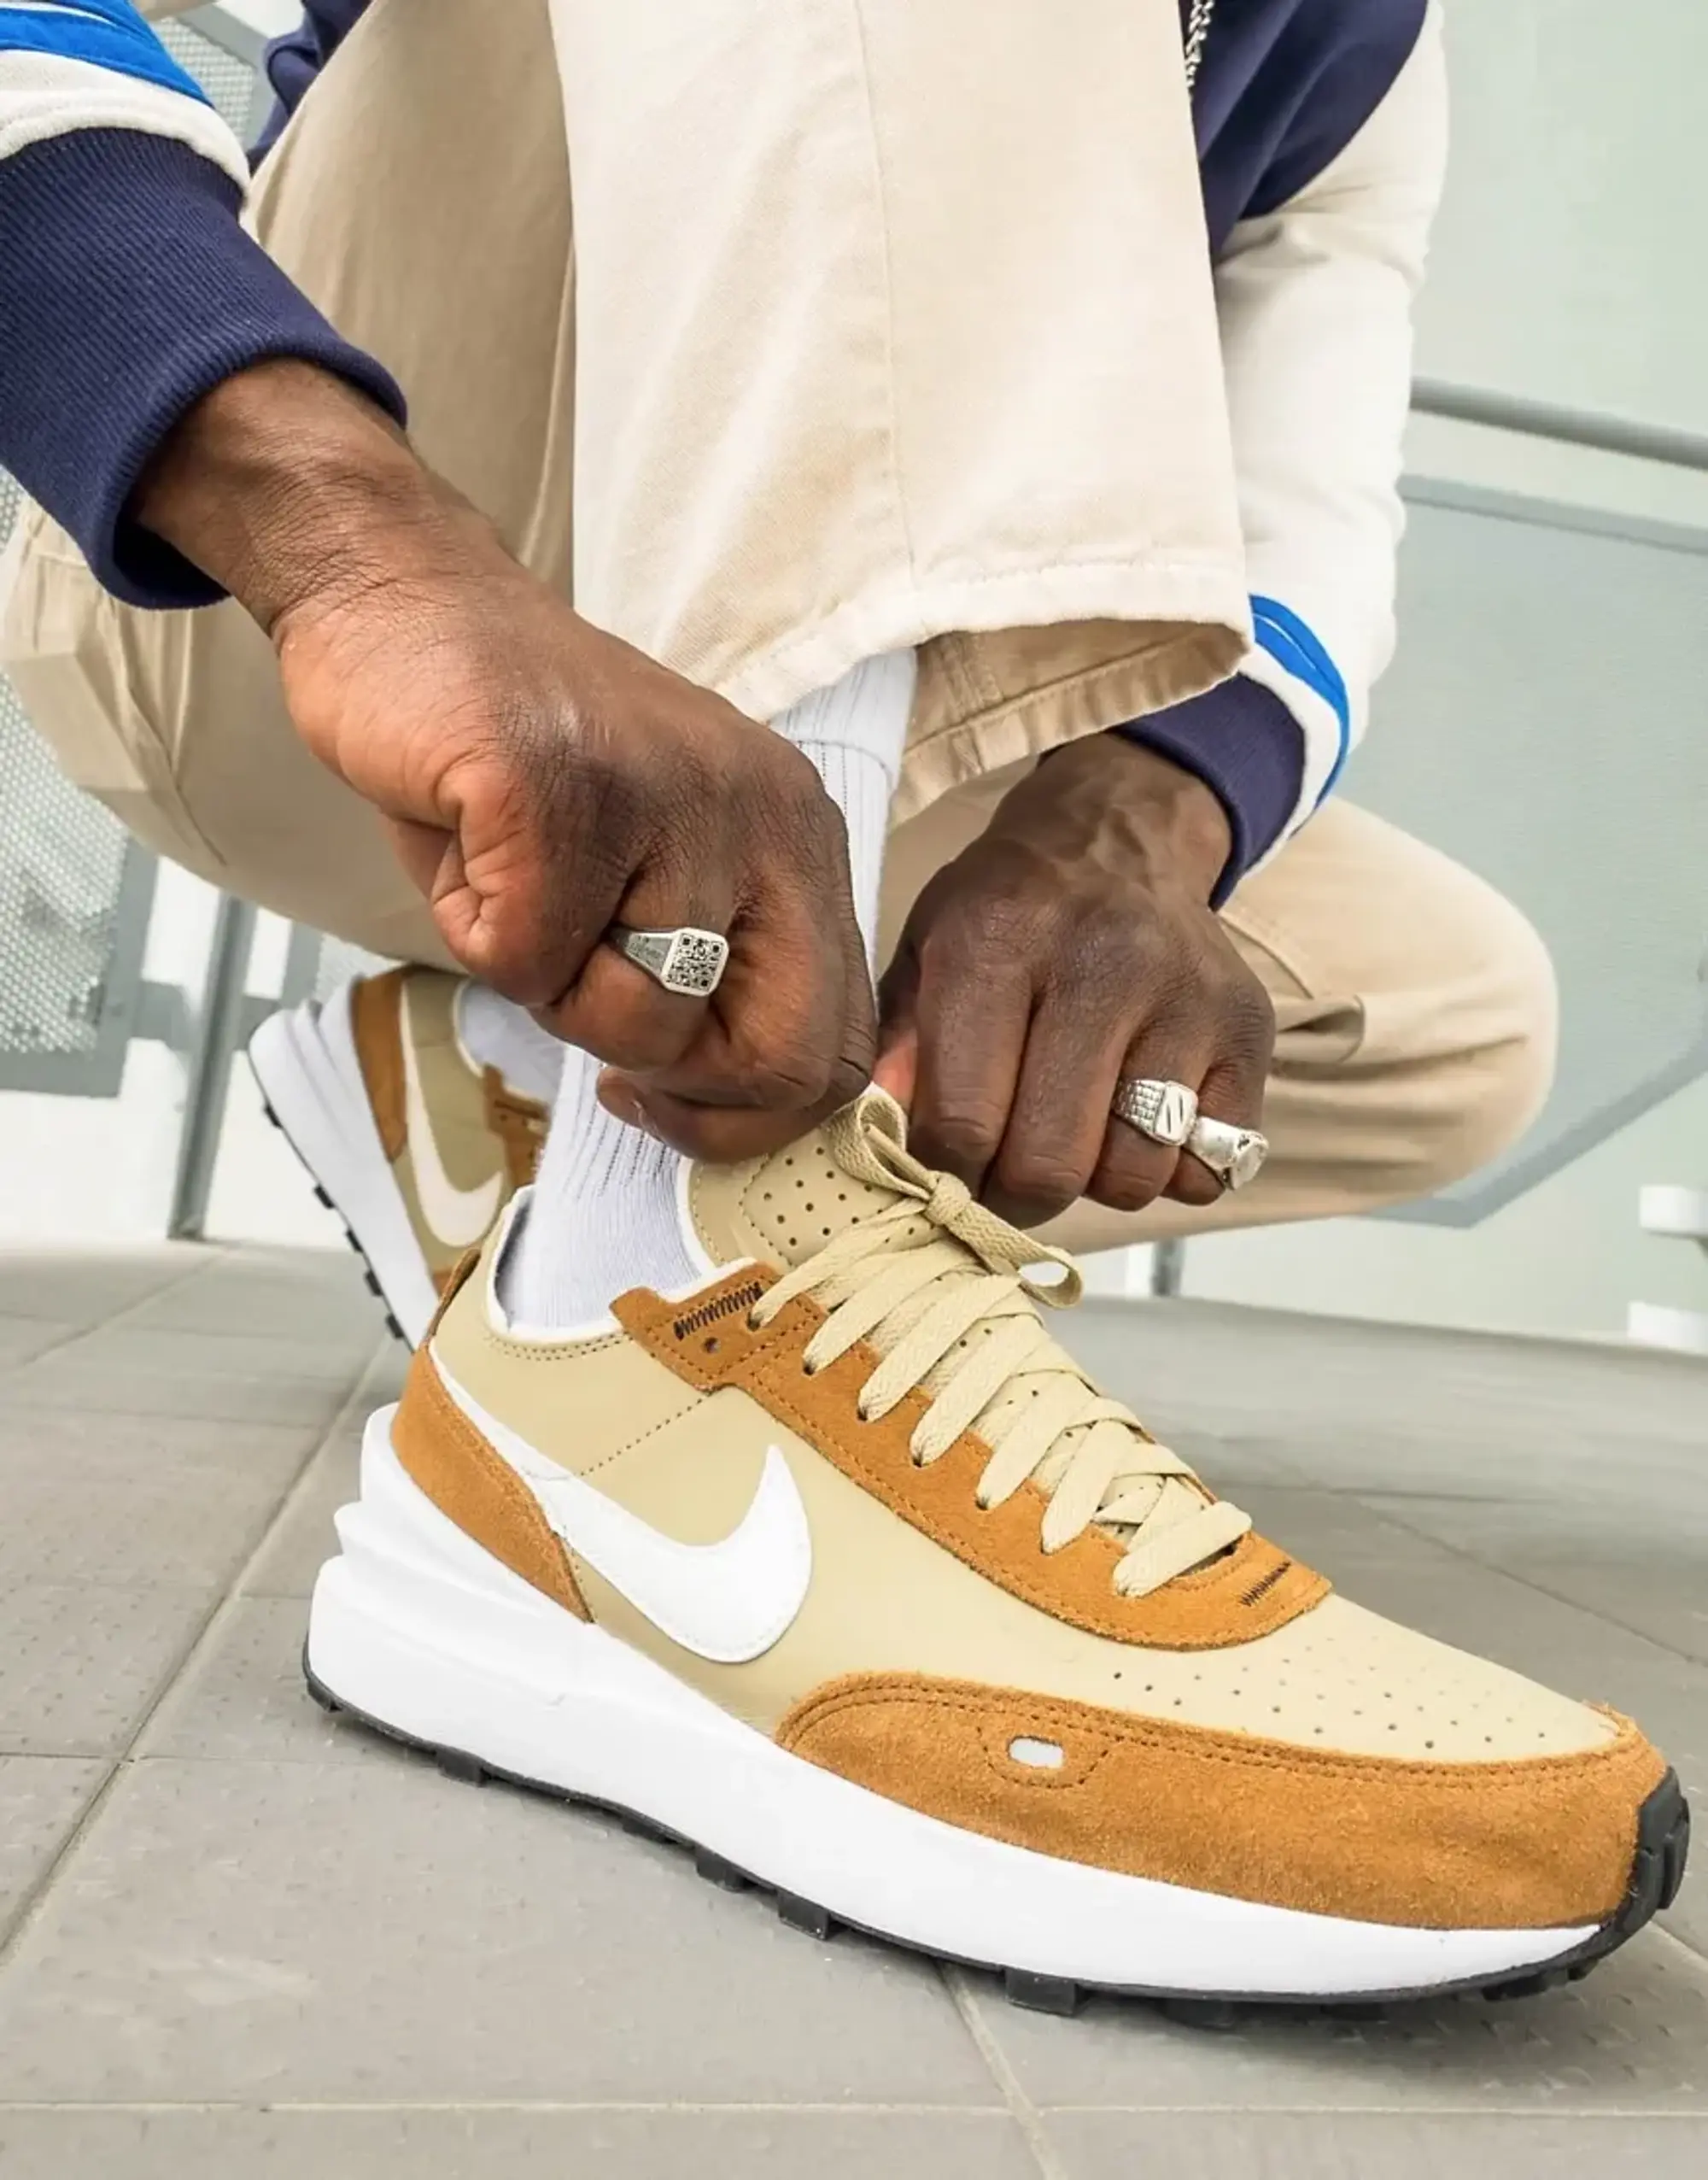 Nike Waffle One Leather Trainers In Beige And Brown-Neutral